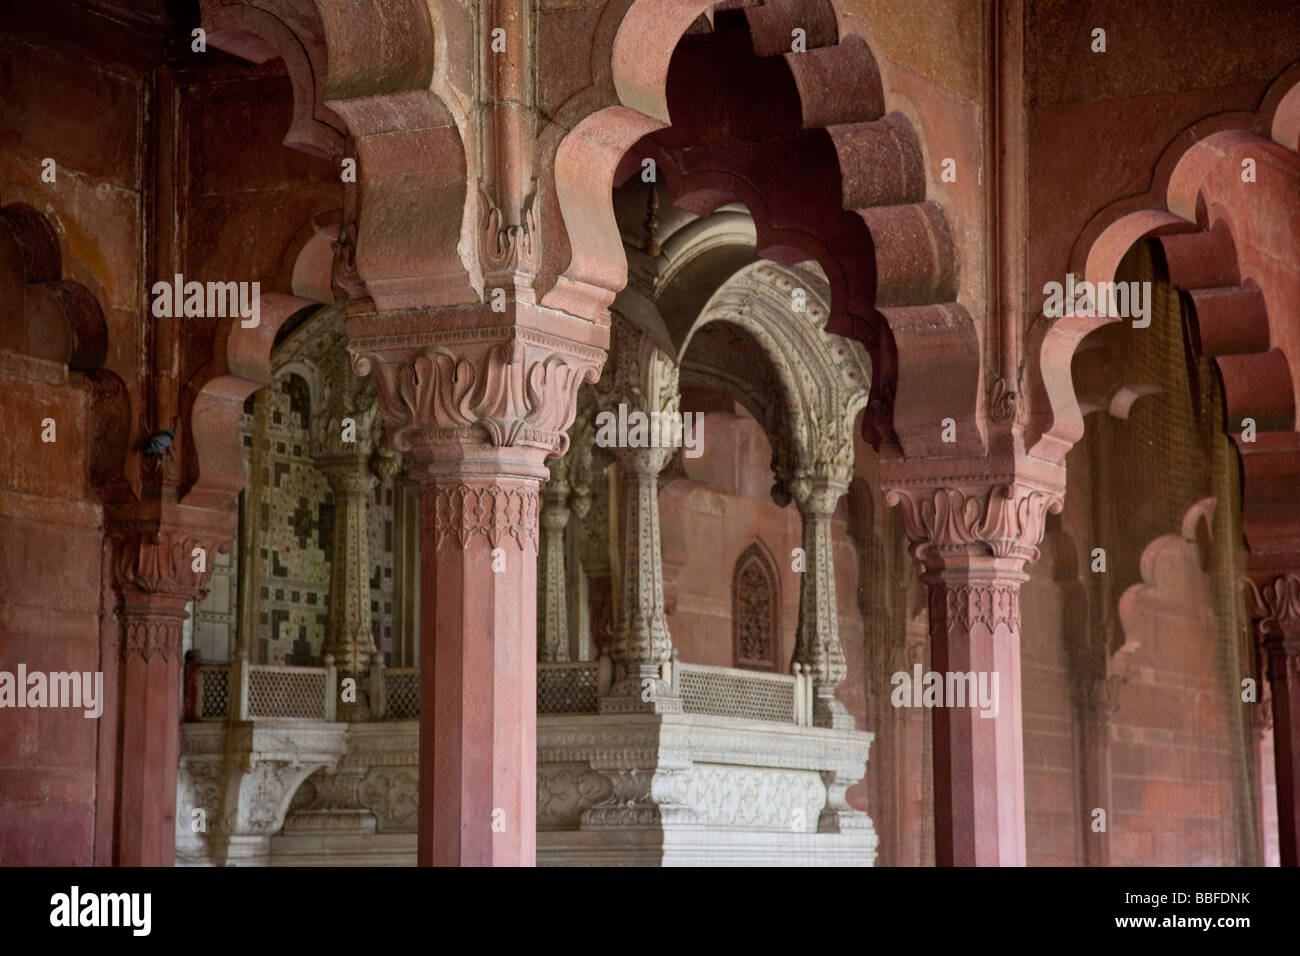 Throne or Jharokha in the Diwan i Am the Red Fort in Delhi India Stock Photo